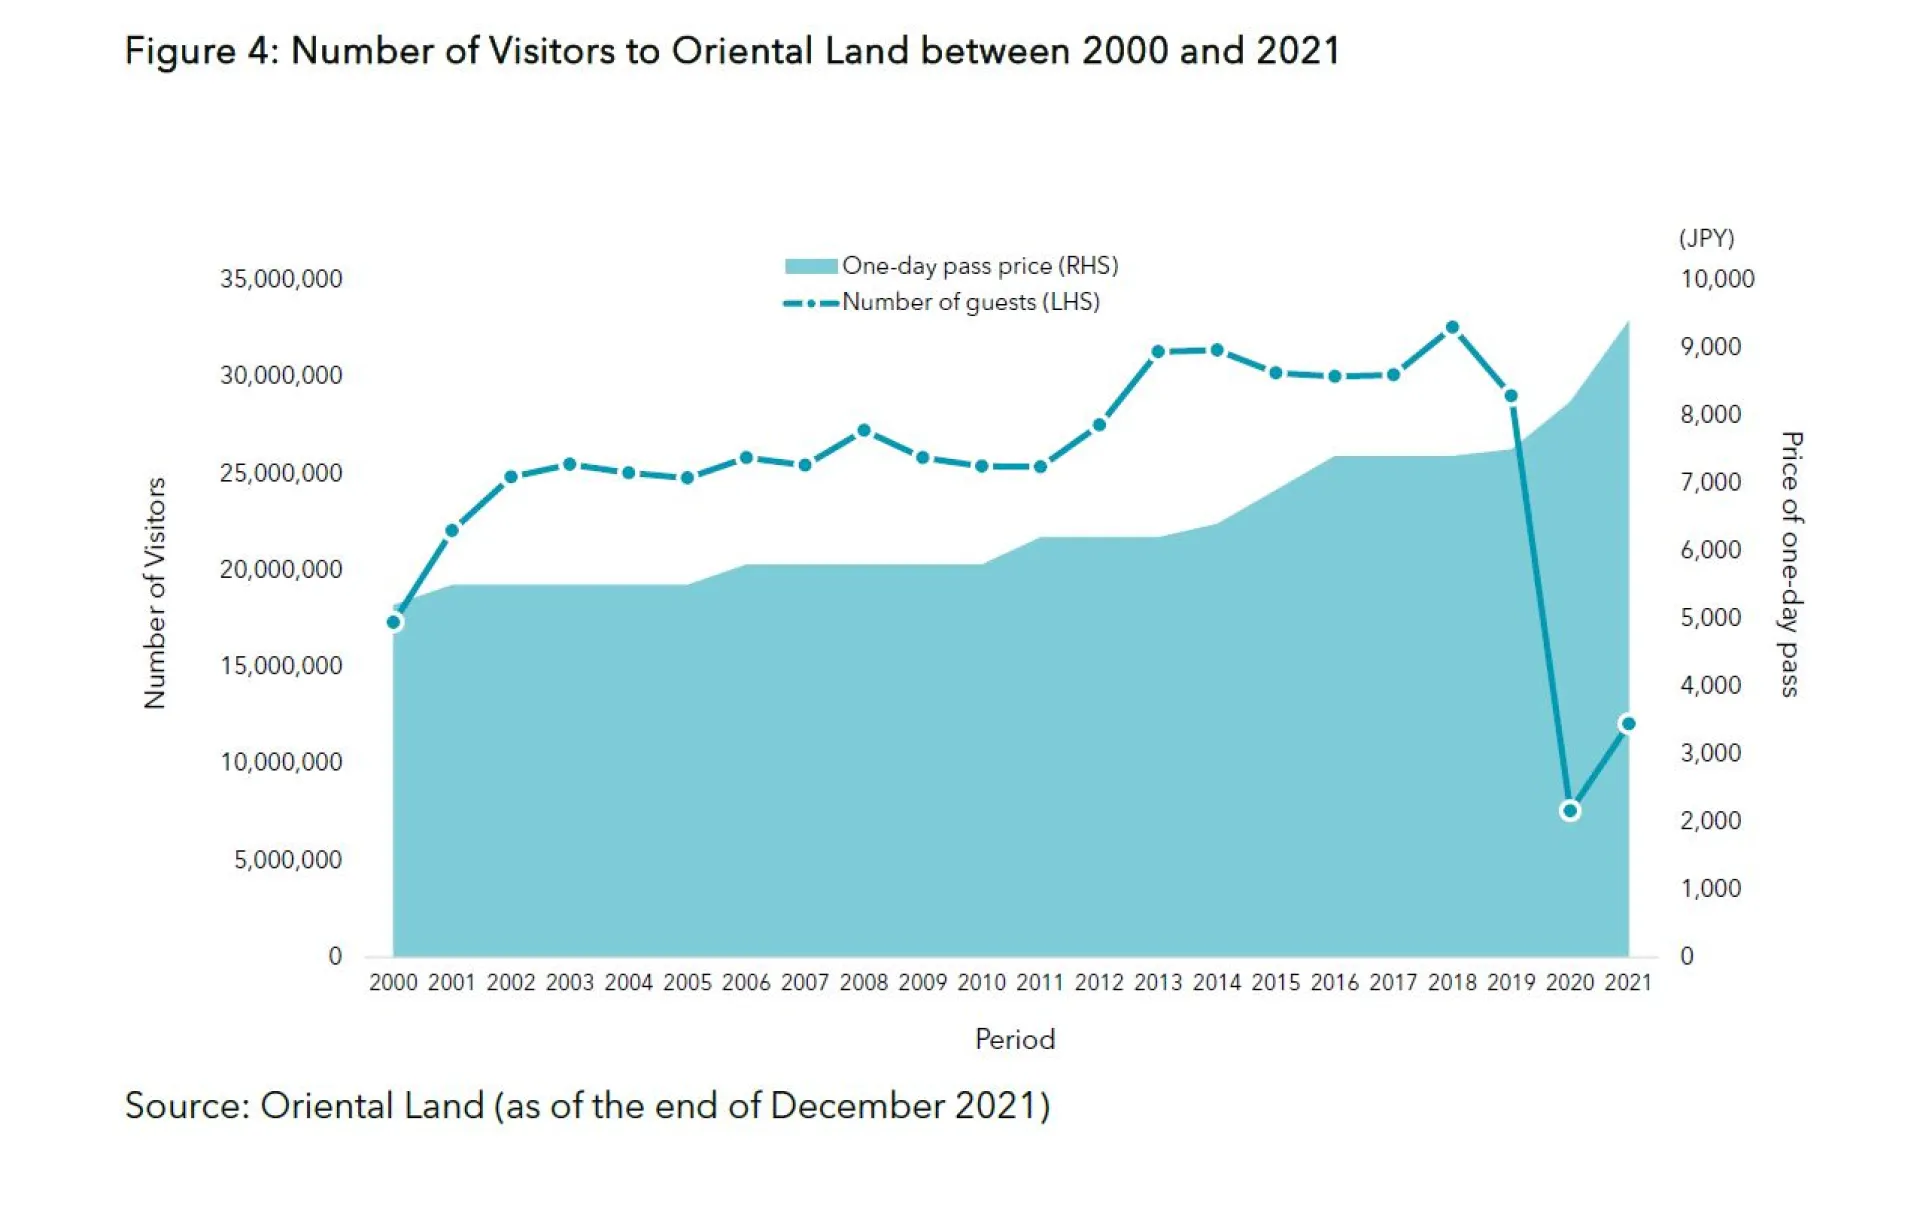 Figure 4 - Number of Visitors to Oriental Land between 2000 and 2021